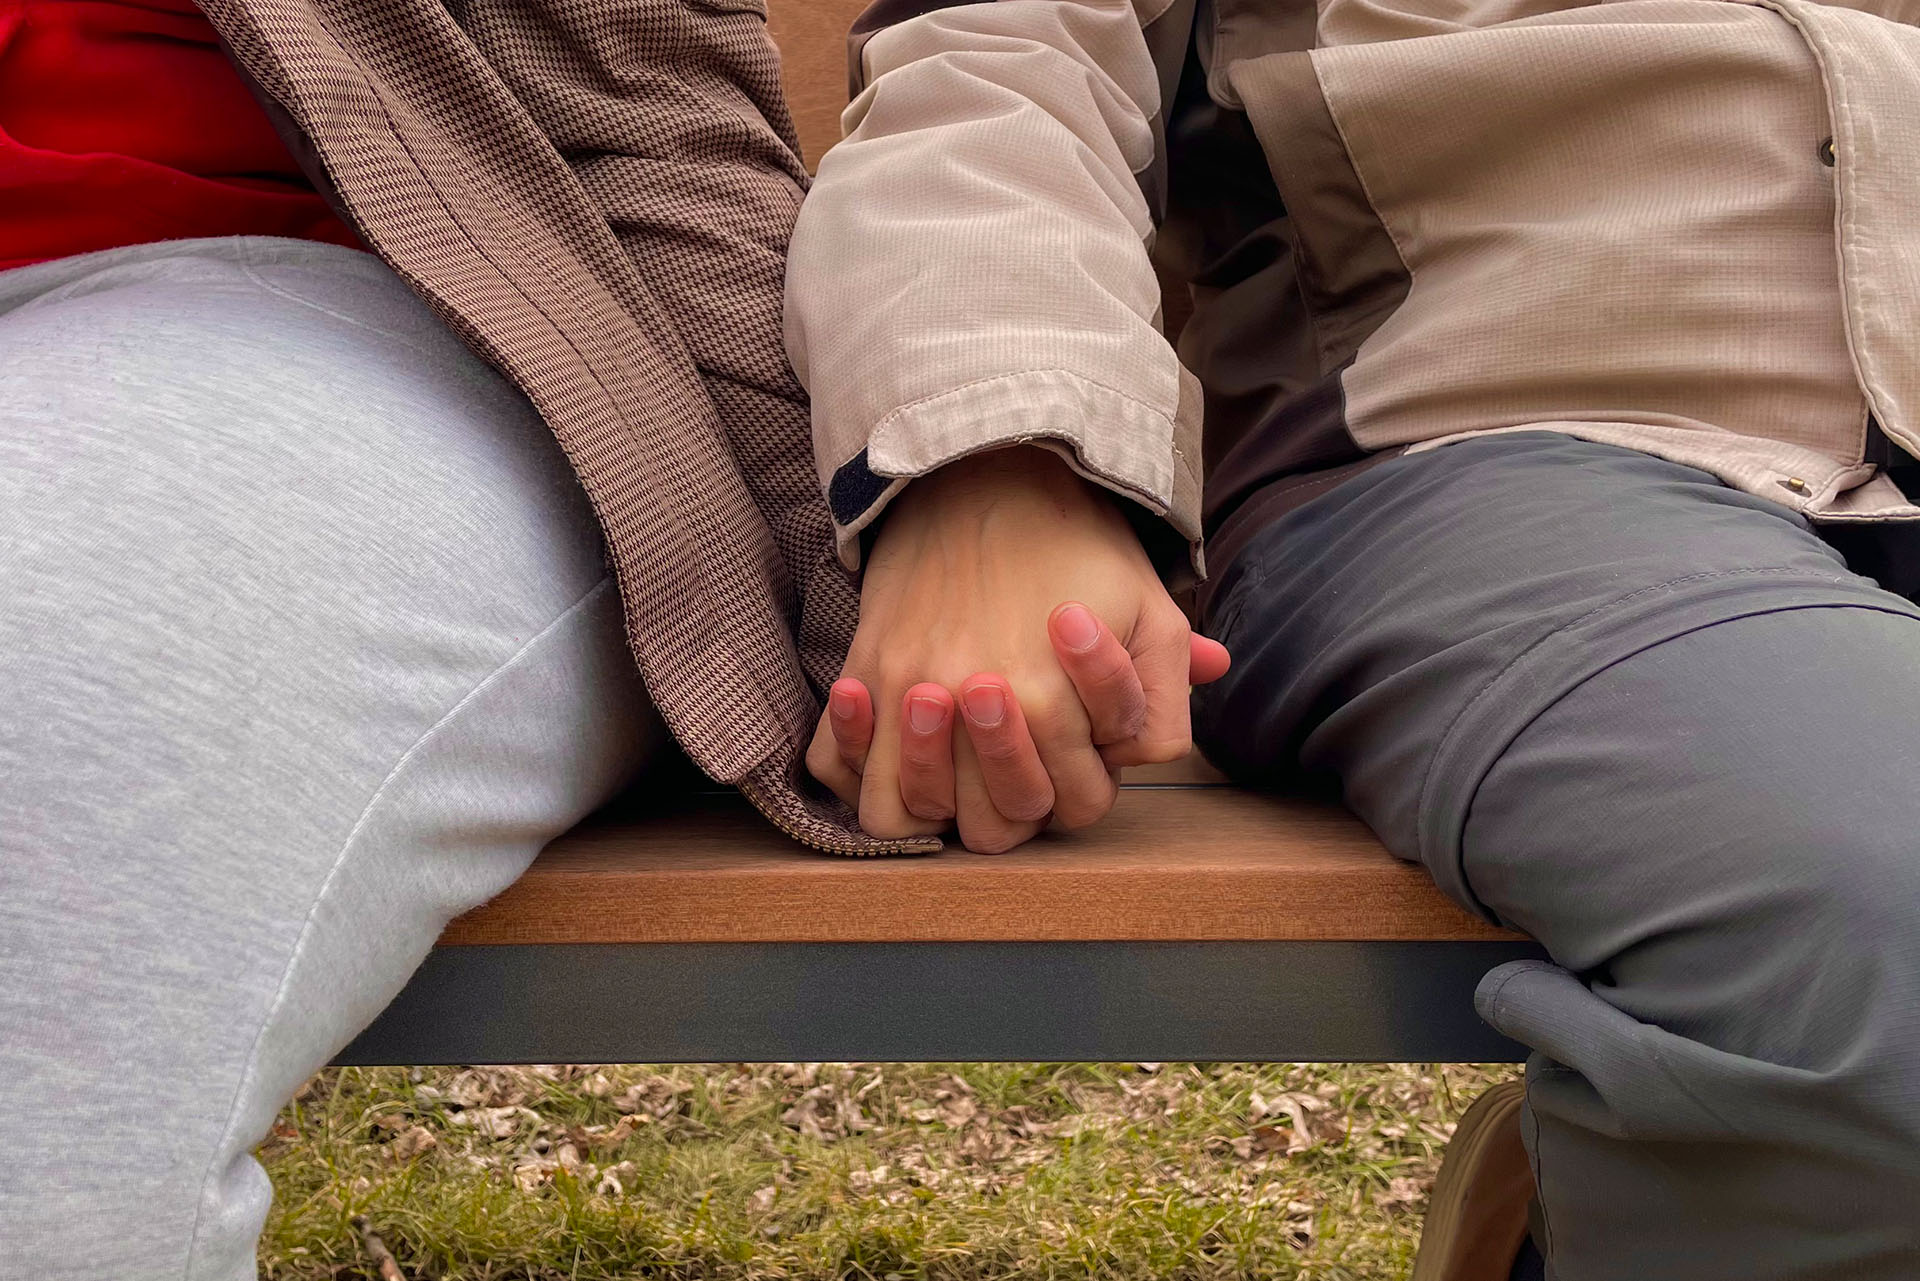 A close-up image of the hands of a couple sitting on a bench.